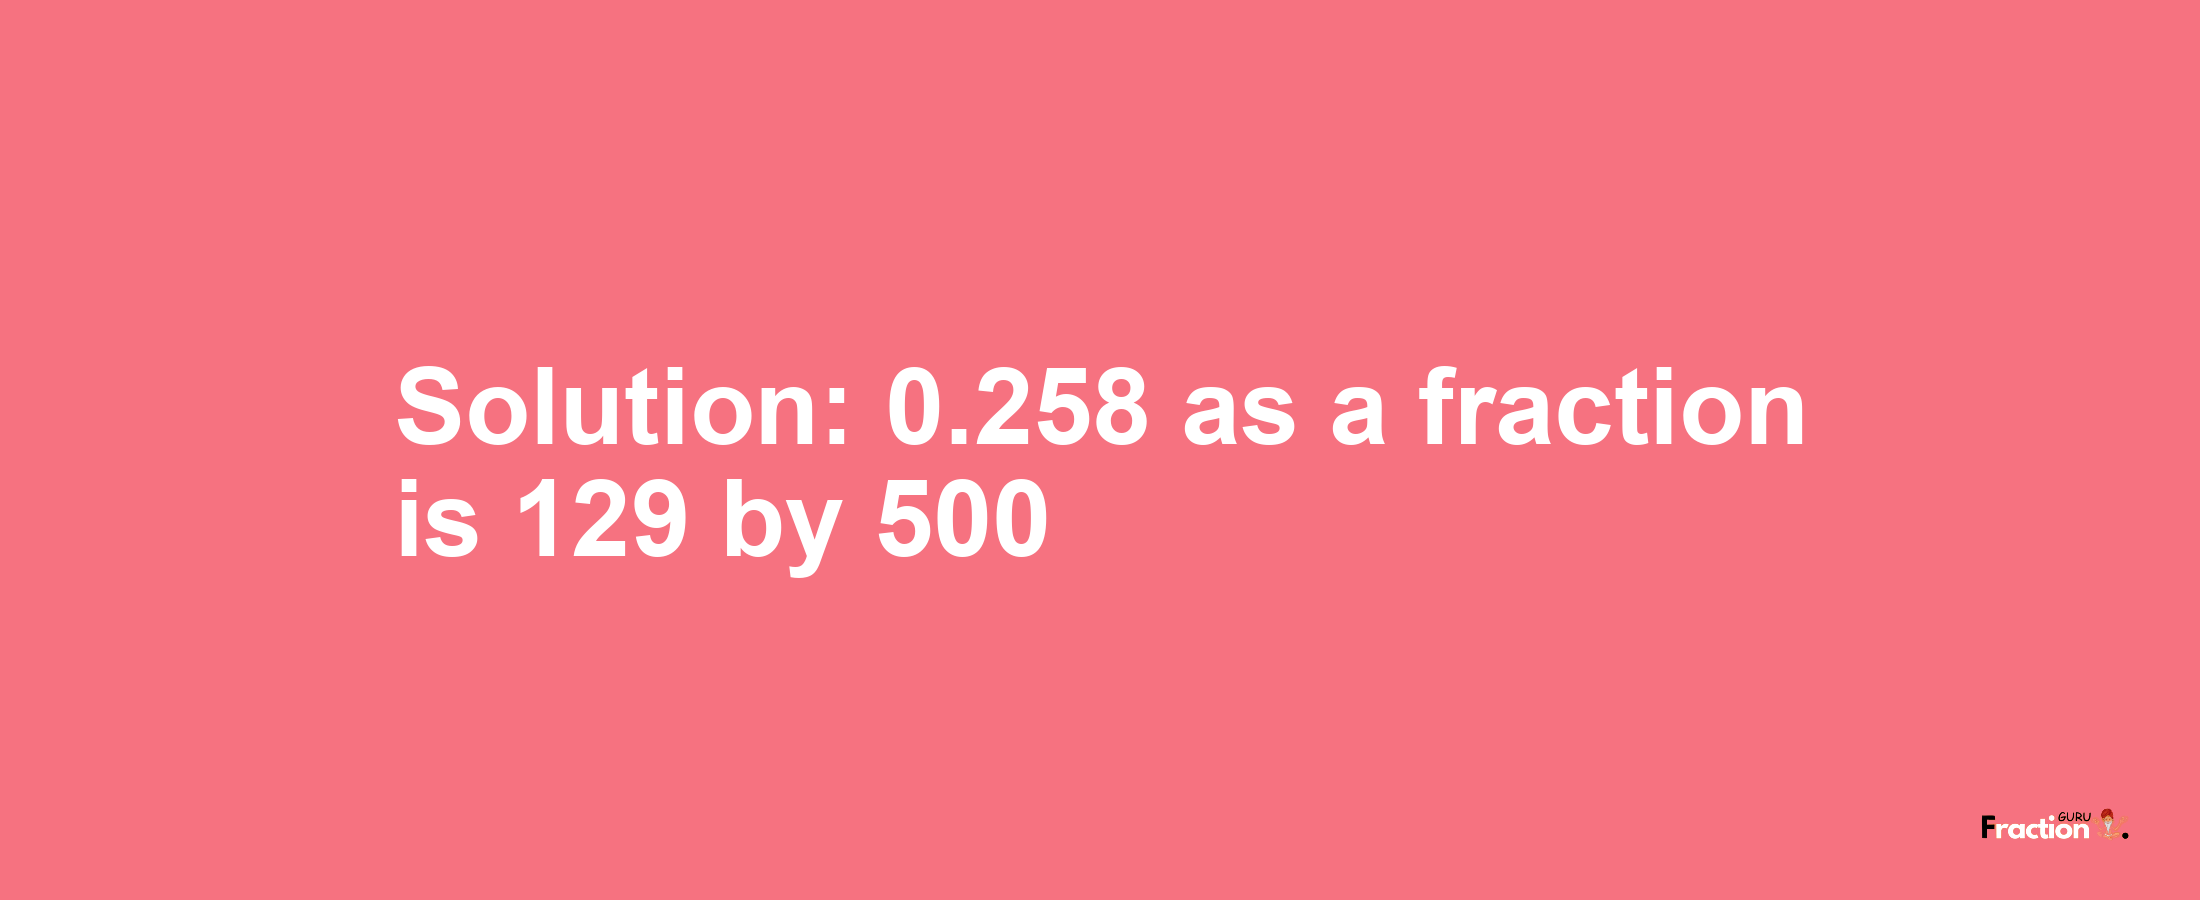 Solution:0.258 as a fraction is 129/500